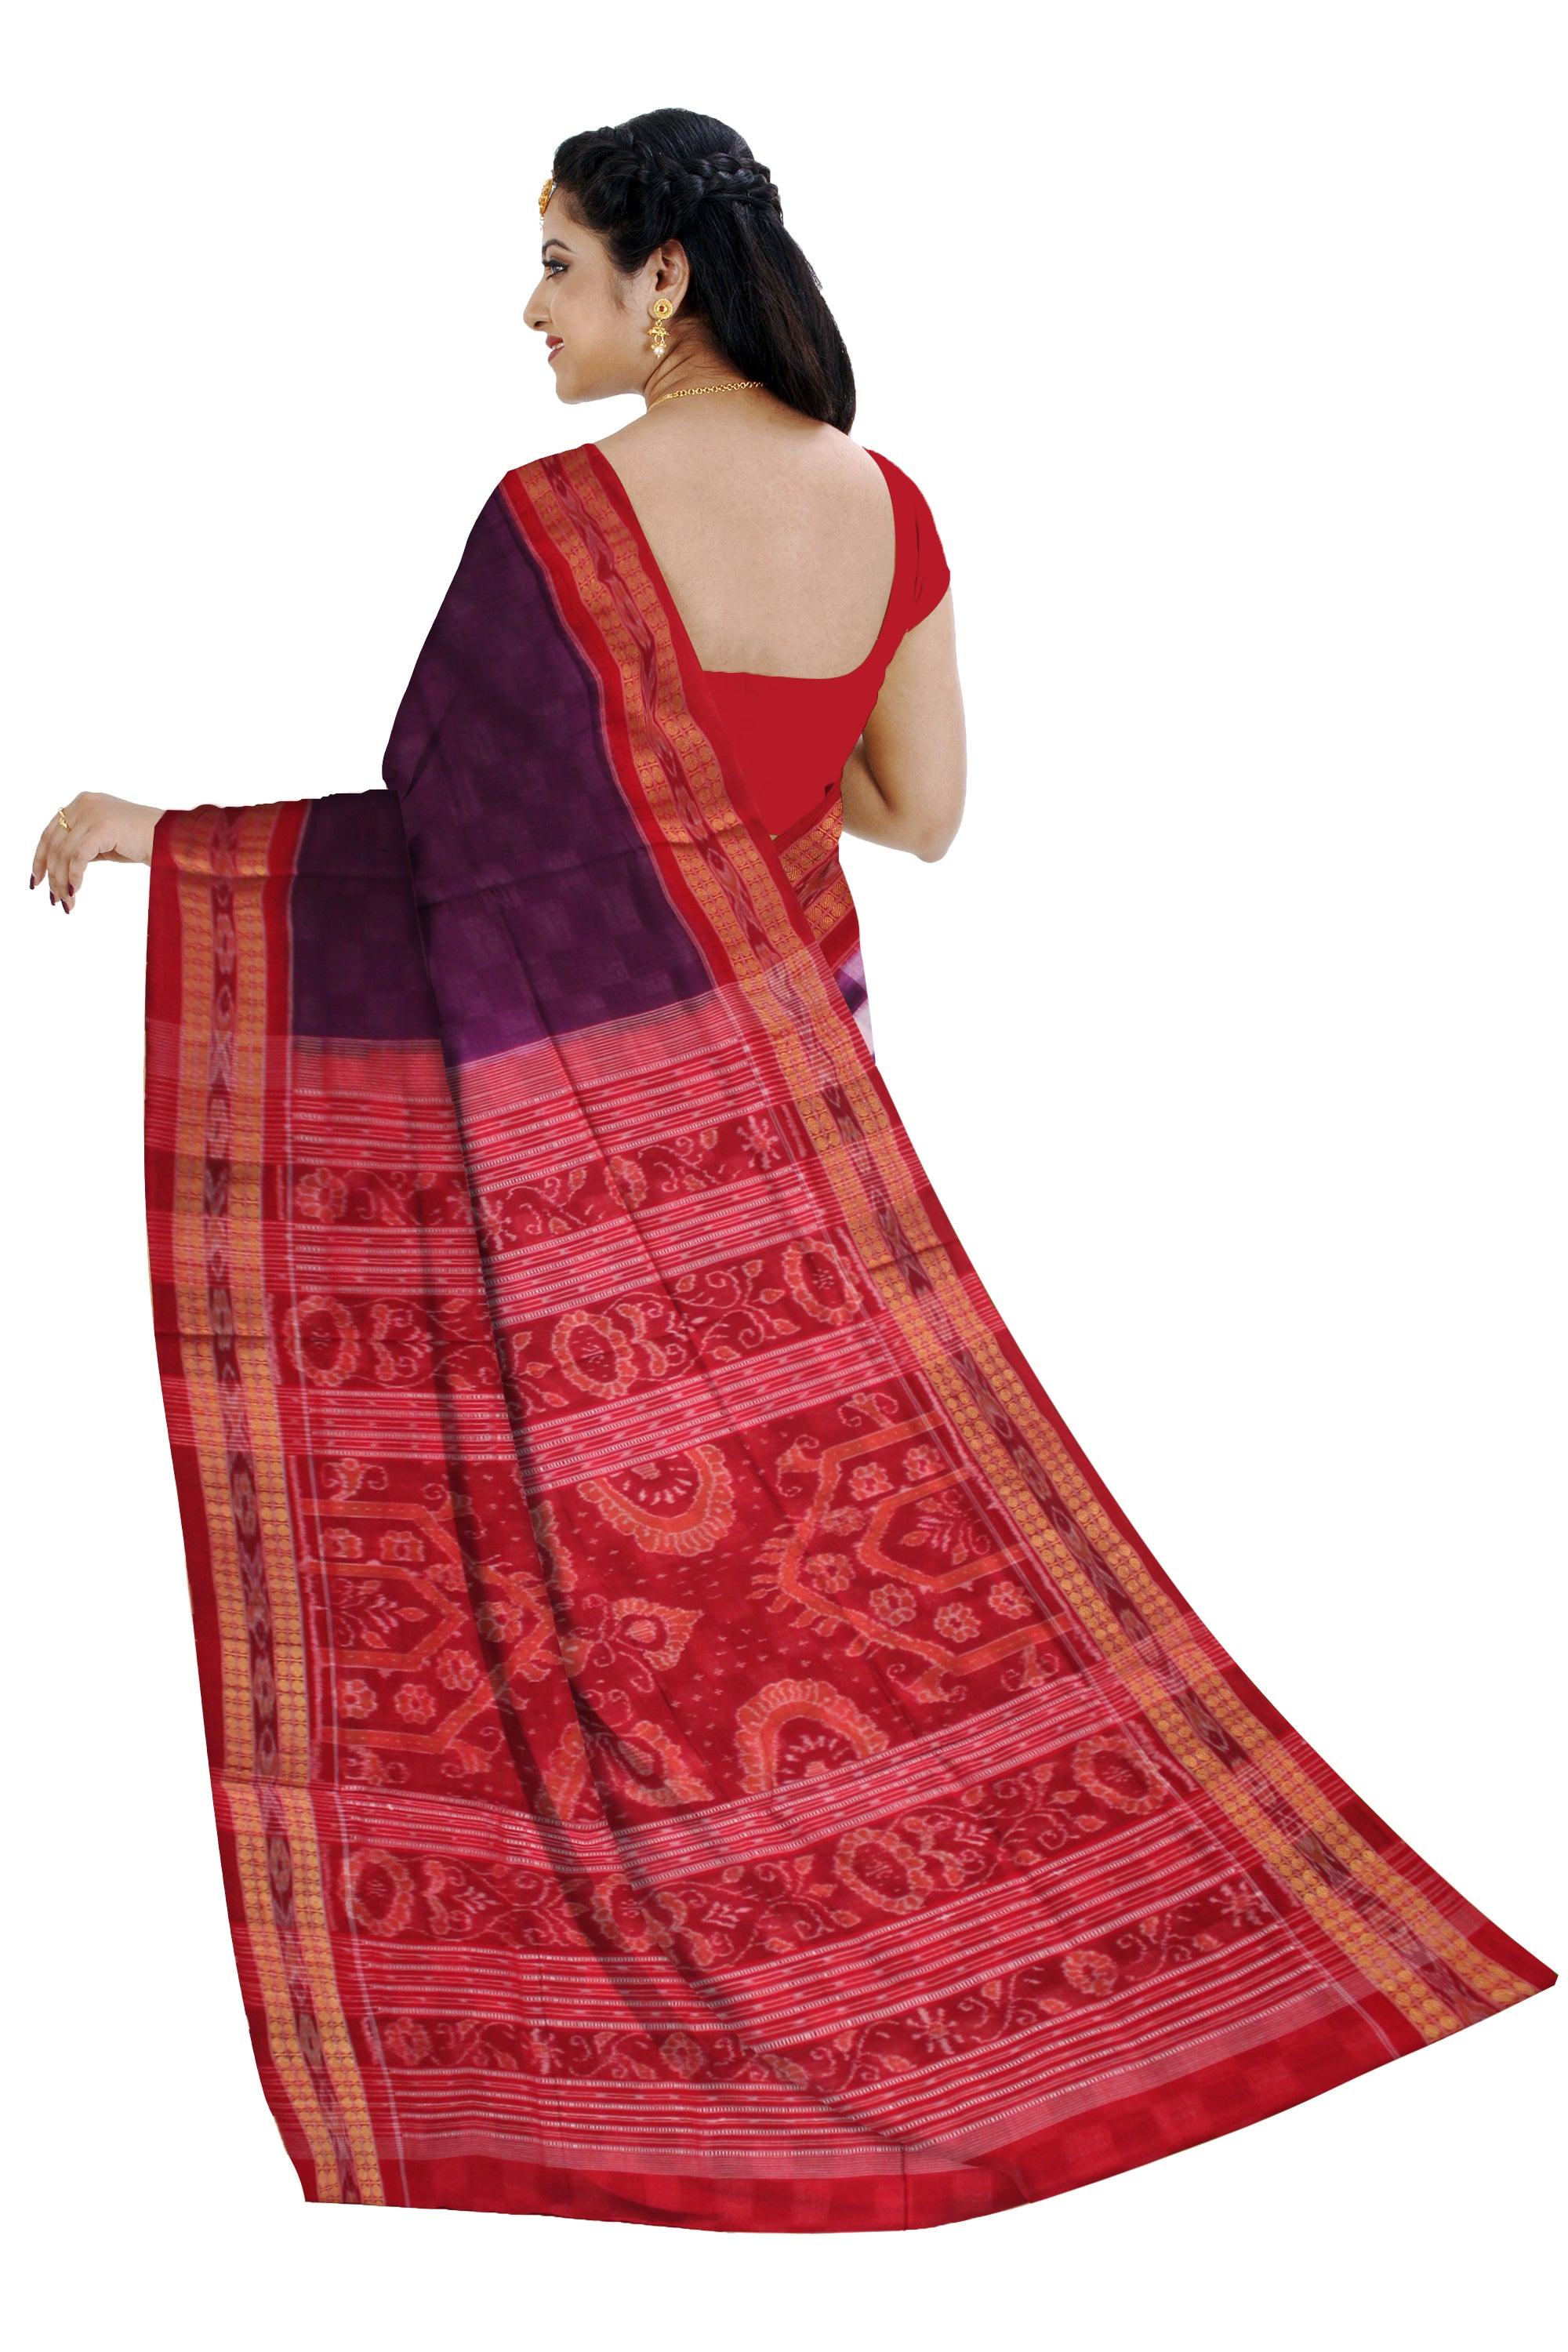 NEW DESIGN OF SONEPUR PASAPALI SAREE IN PURPLE AND RED COLOR, WITH OUT BLOUSE PIECE. - Koshali Arts & Crafts Enterprise